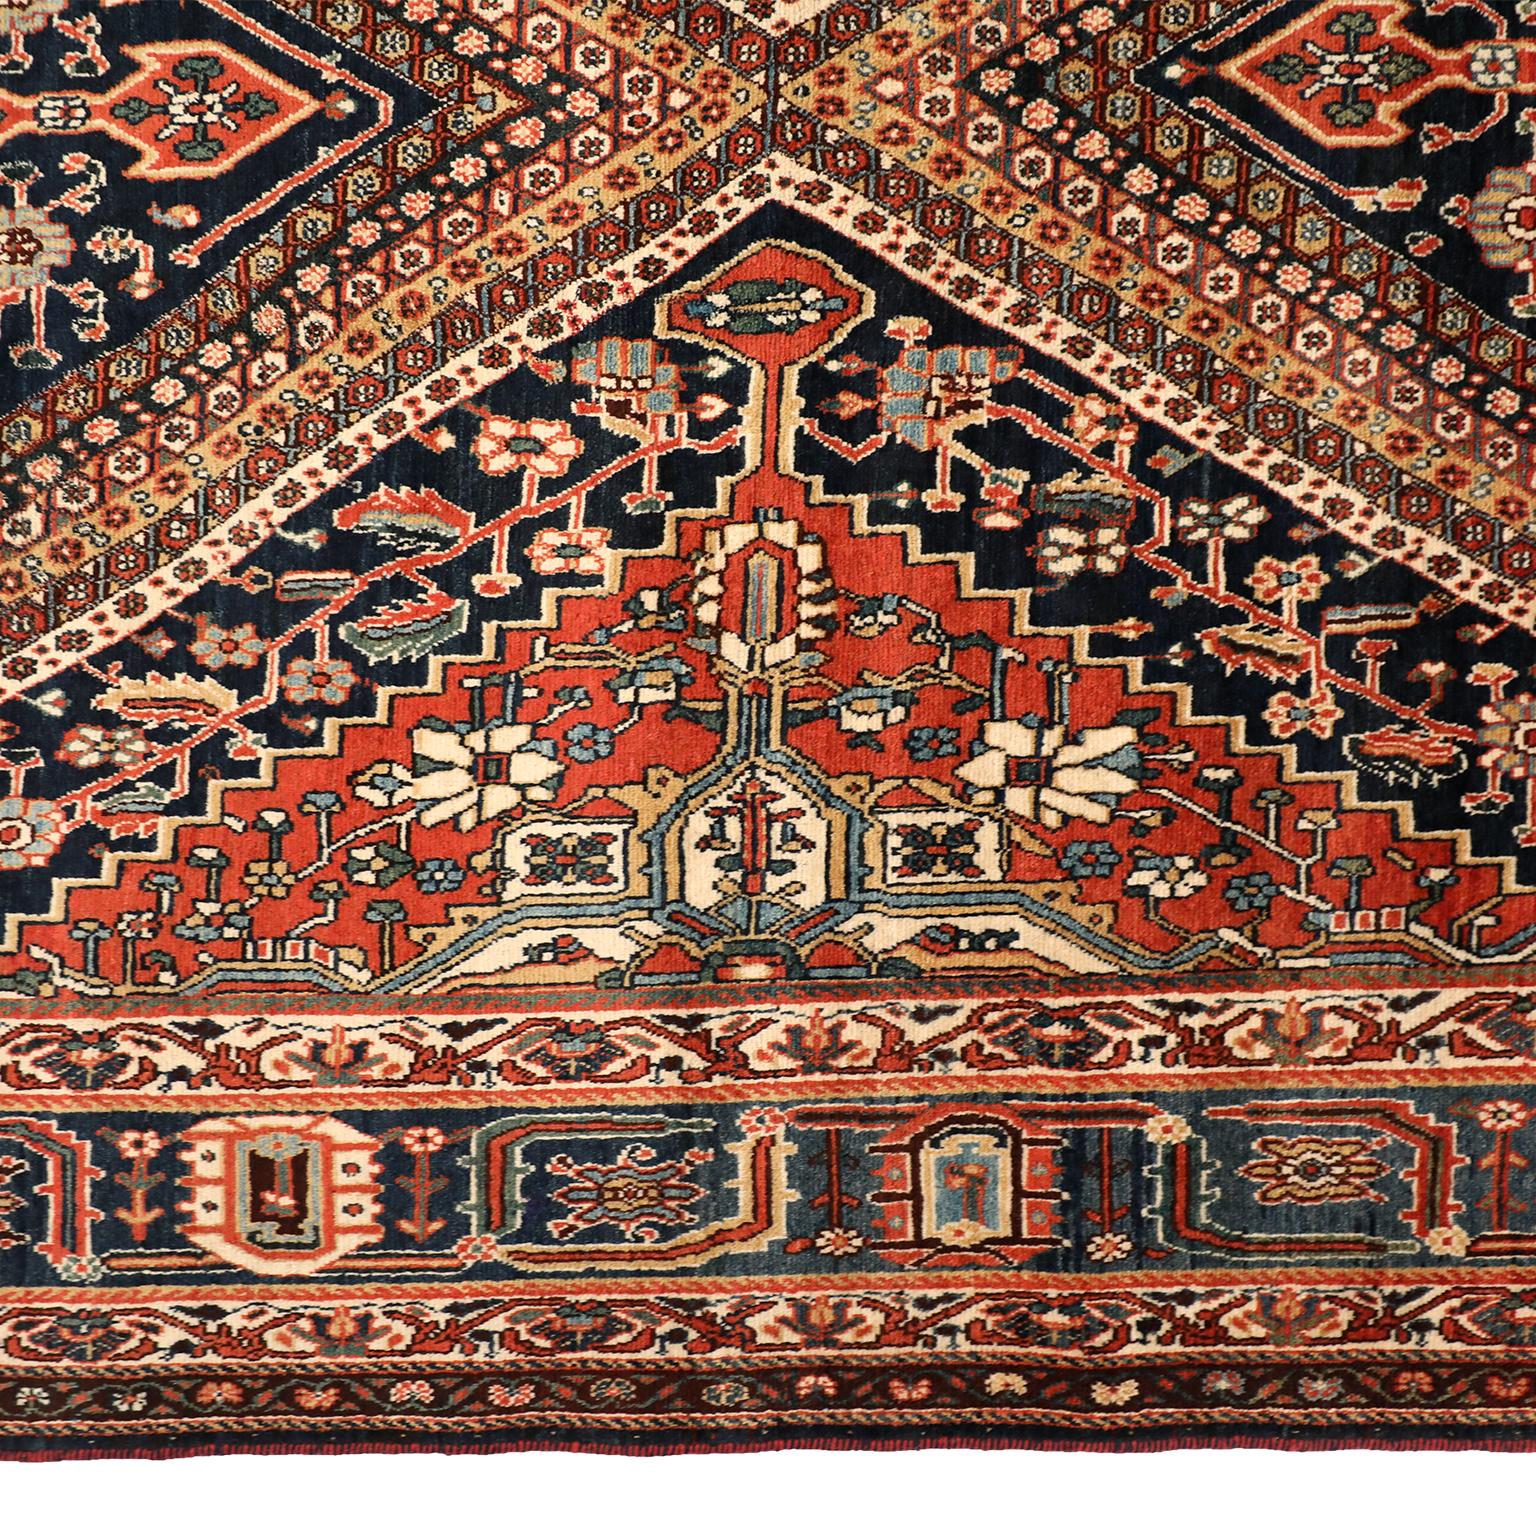 Antique 1920s Qashqai Persian Rug, Wool, 11' x 17' For Sale 1